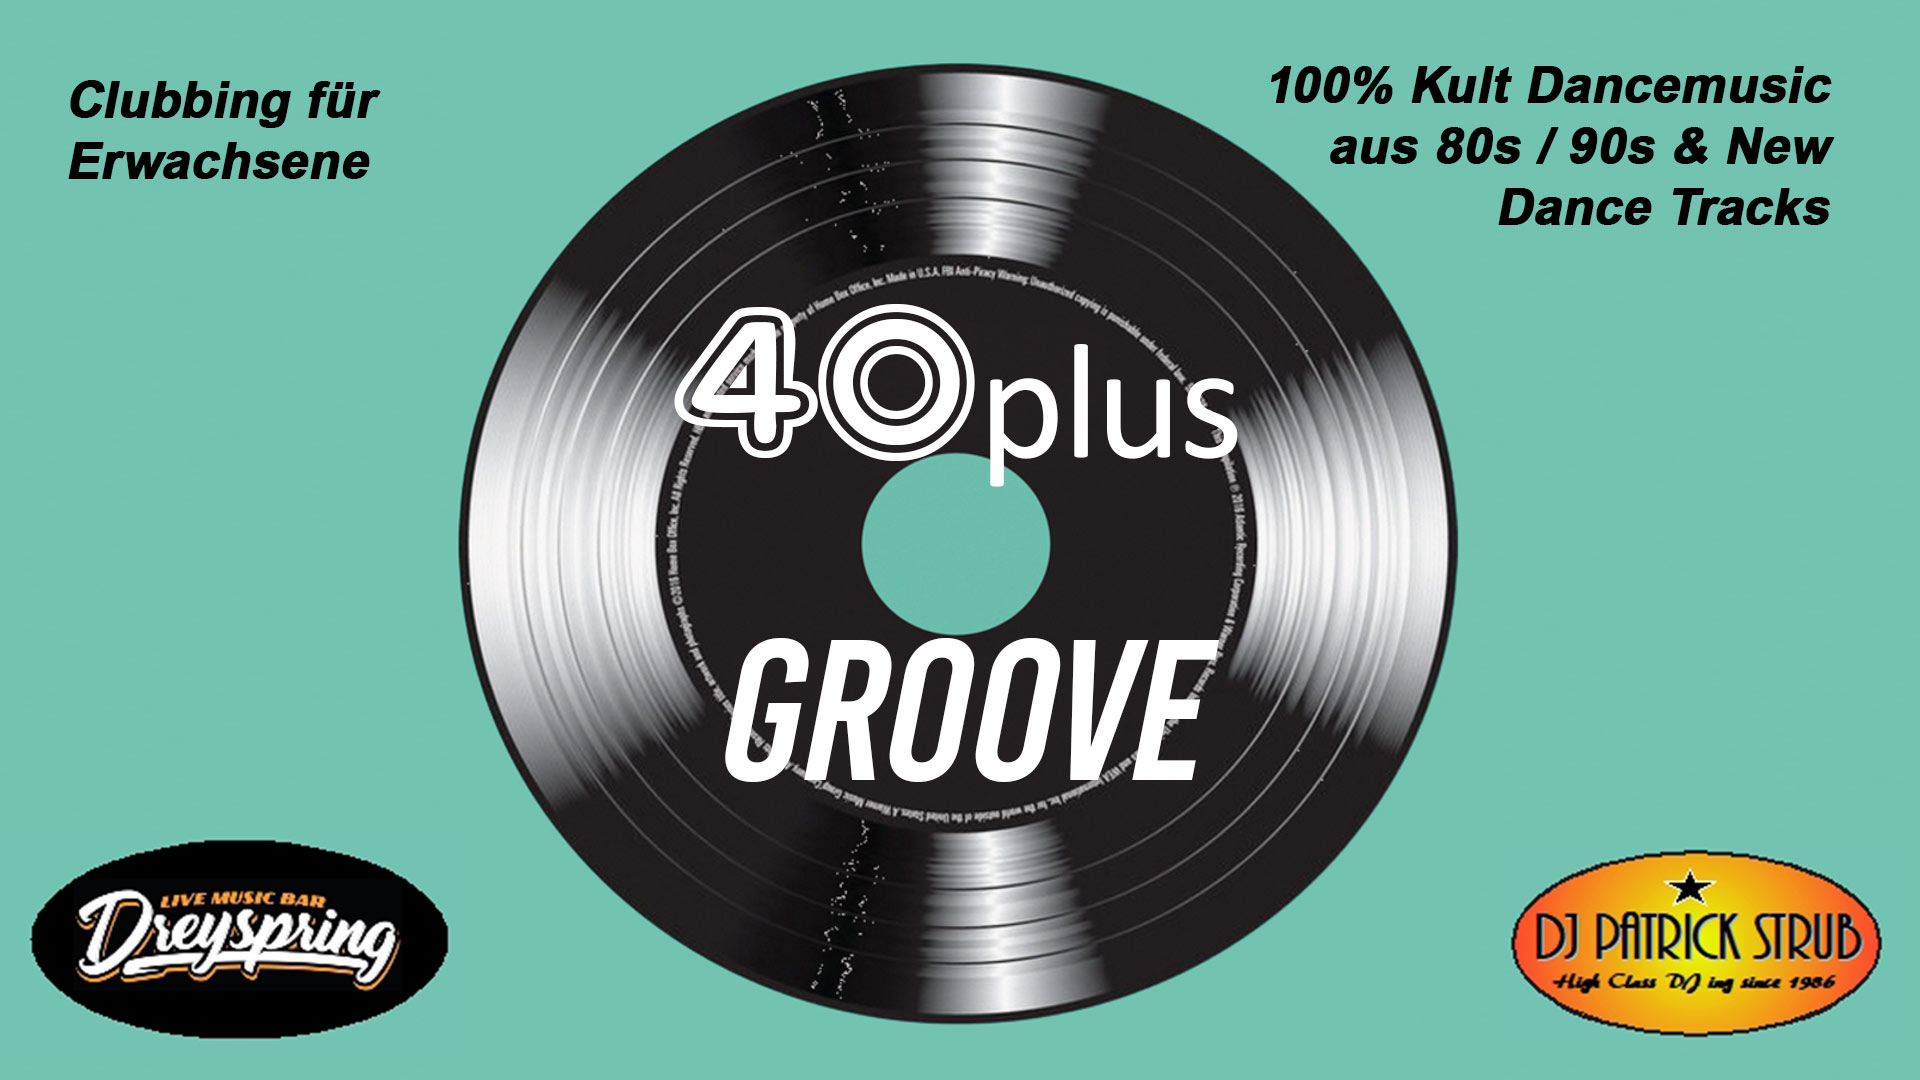 40plus Groove Party Schlachthof Lahr